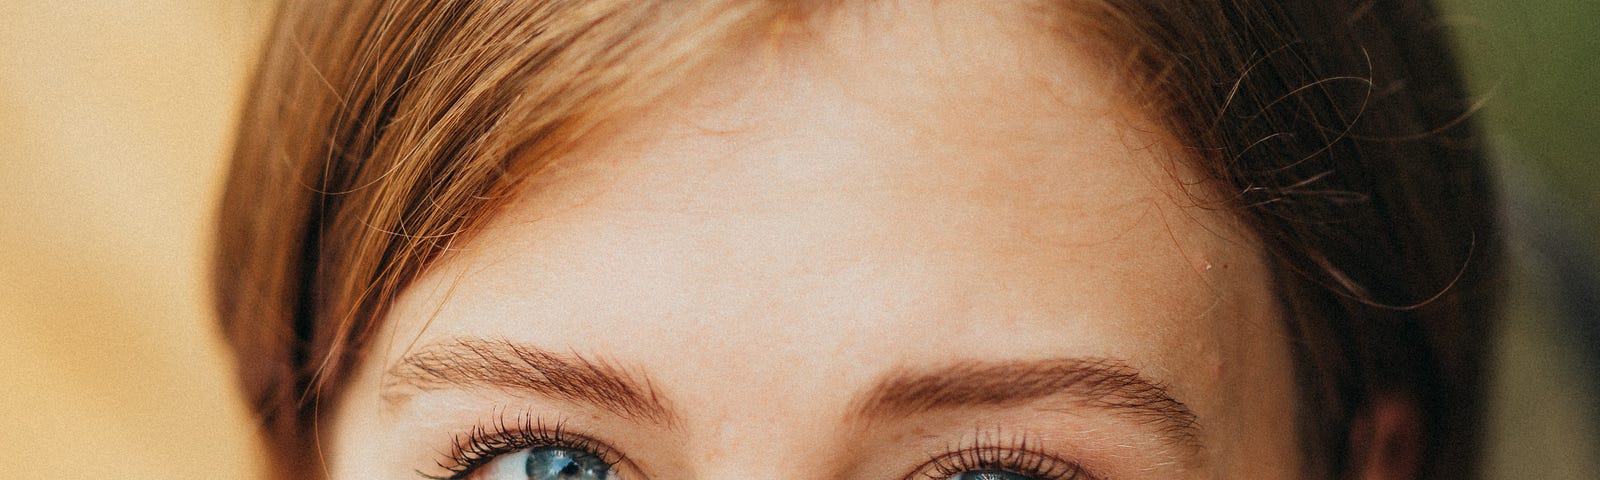 close up of a young woman’s face, eyes looking up, in serious comtemplation